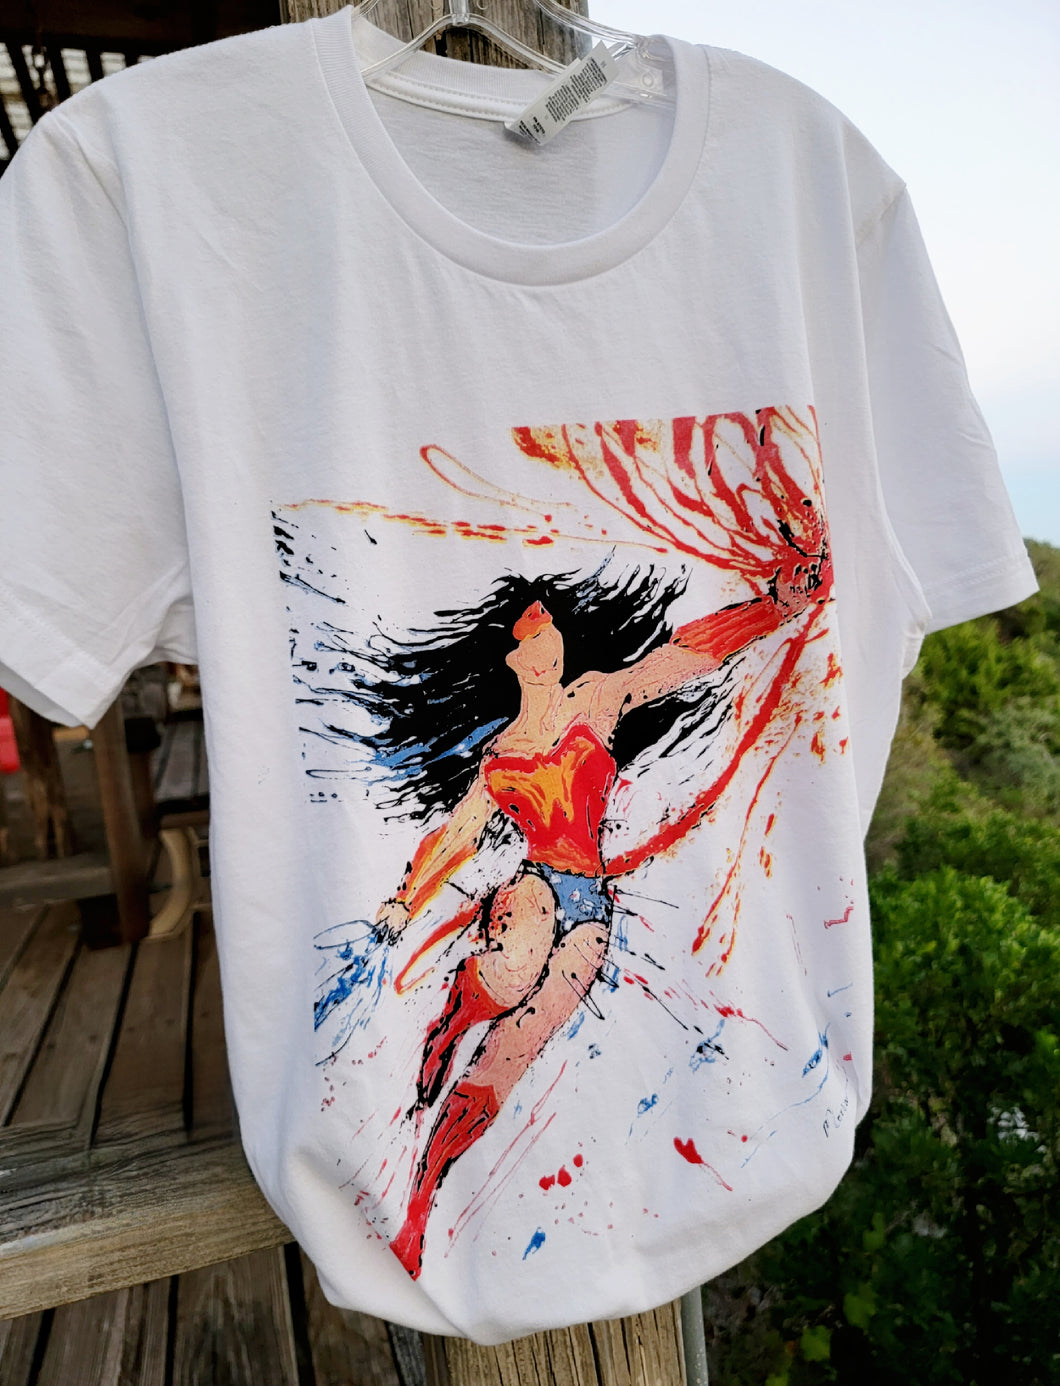 WONDER WOMAN ABSTRACT ARTSY WHITE T-SHIRT BASED ON MONA HELMY ART PAINTING